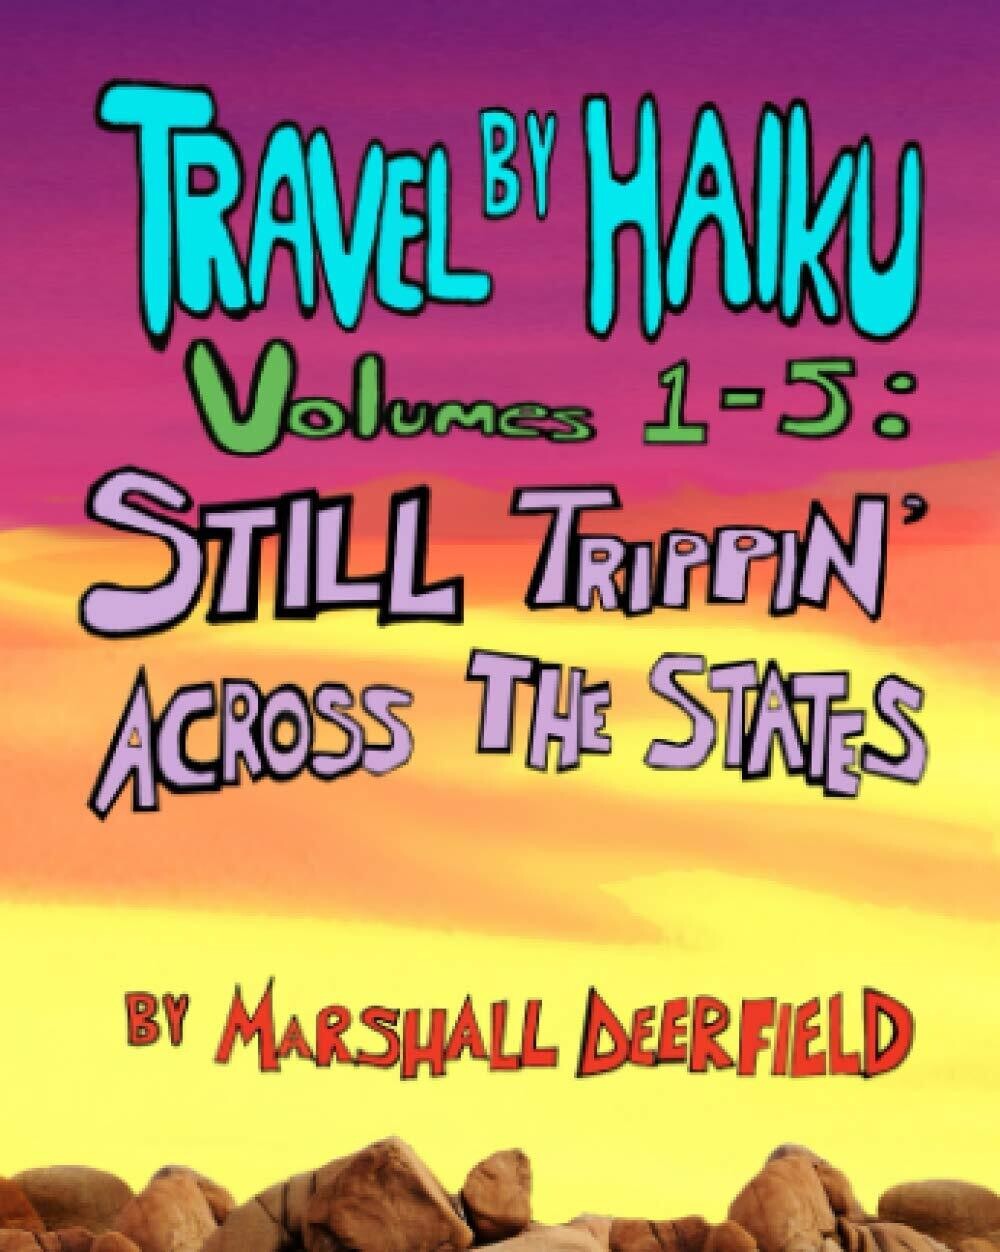 Travel by Haiku Volumes 1-5: Still Trippin' Across the States by Marshall Deerfield